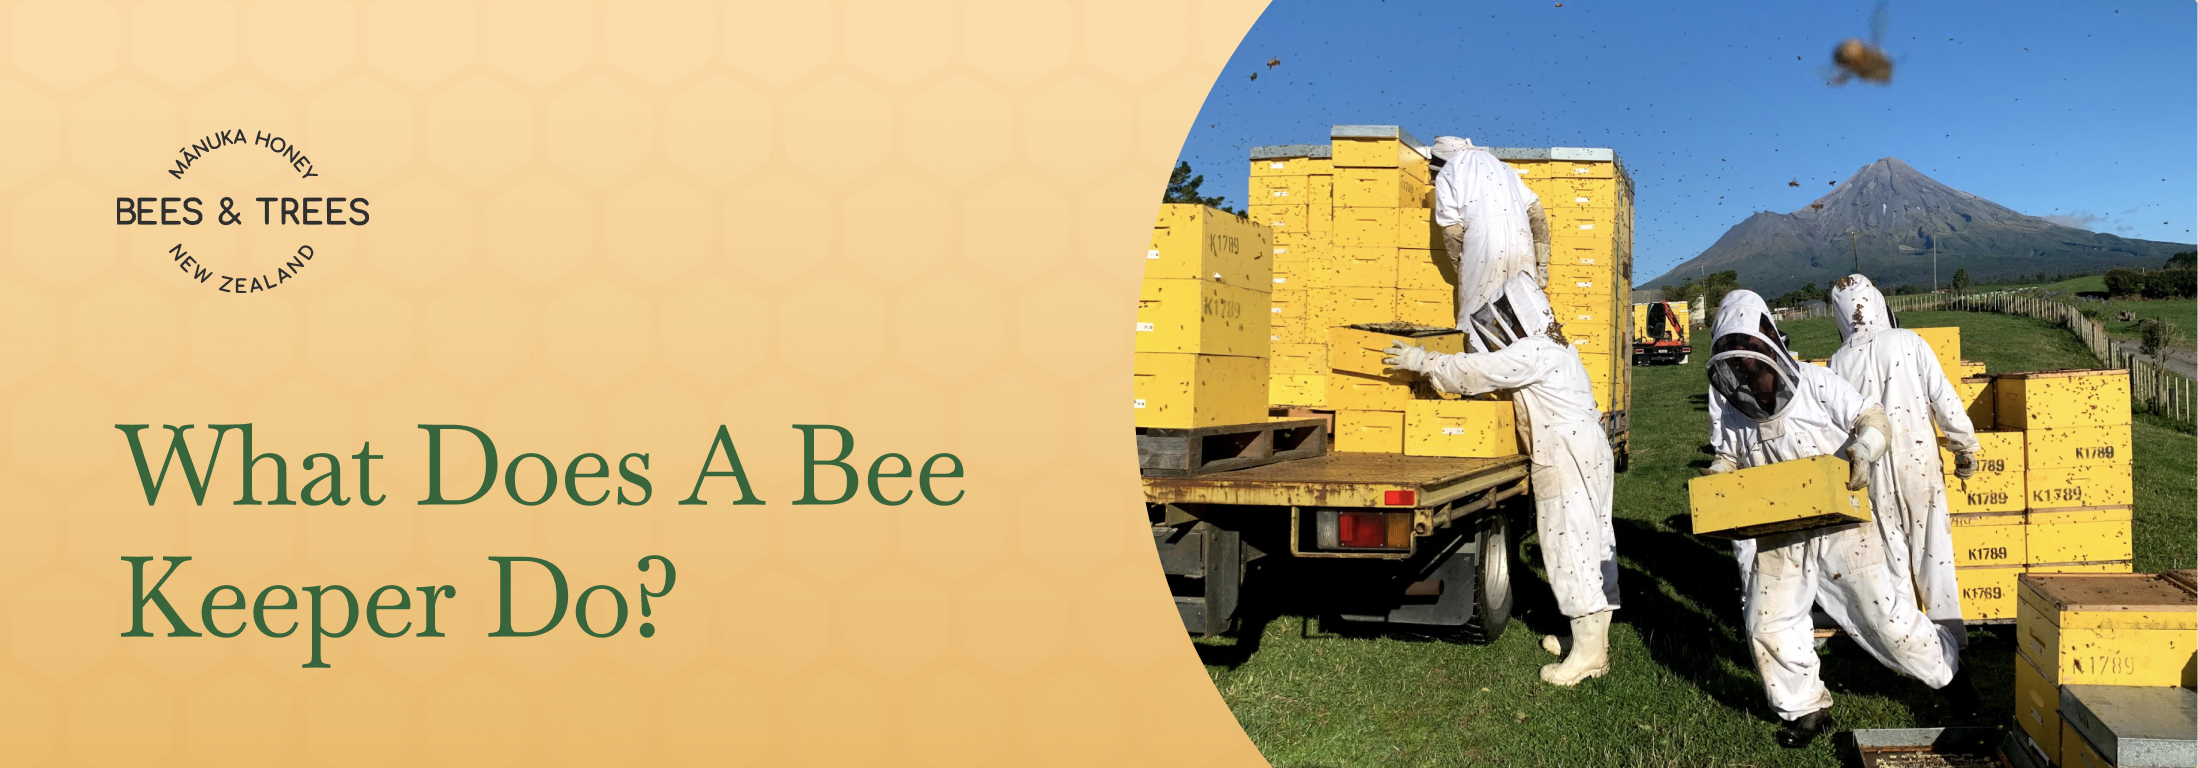 What Does A Bee Keeper Do?